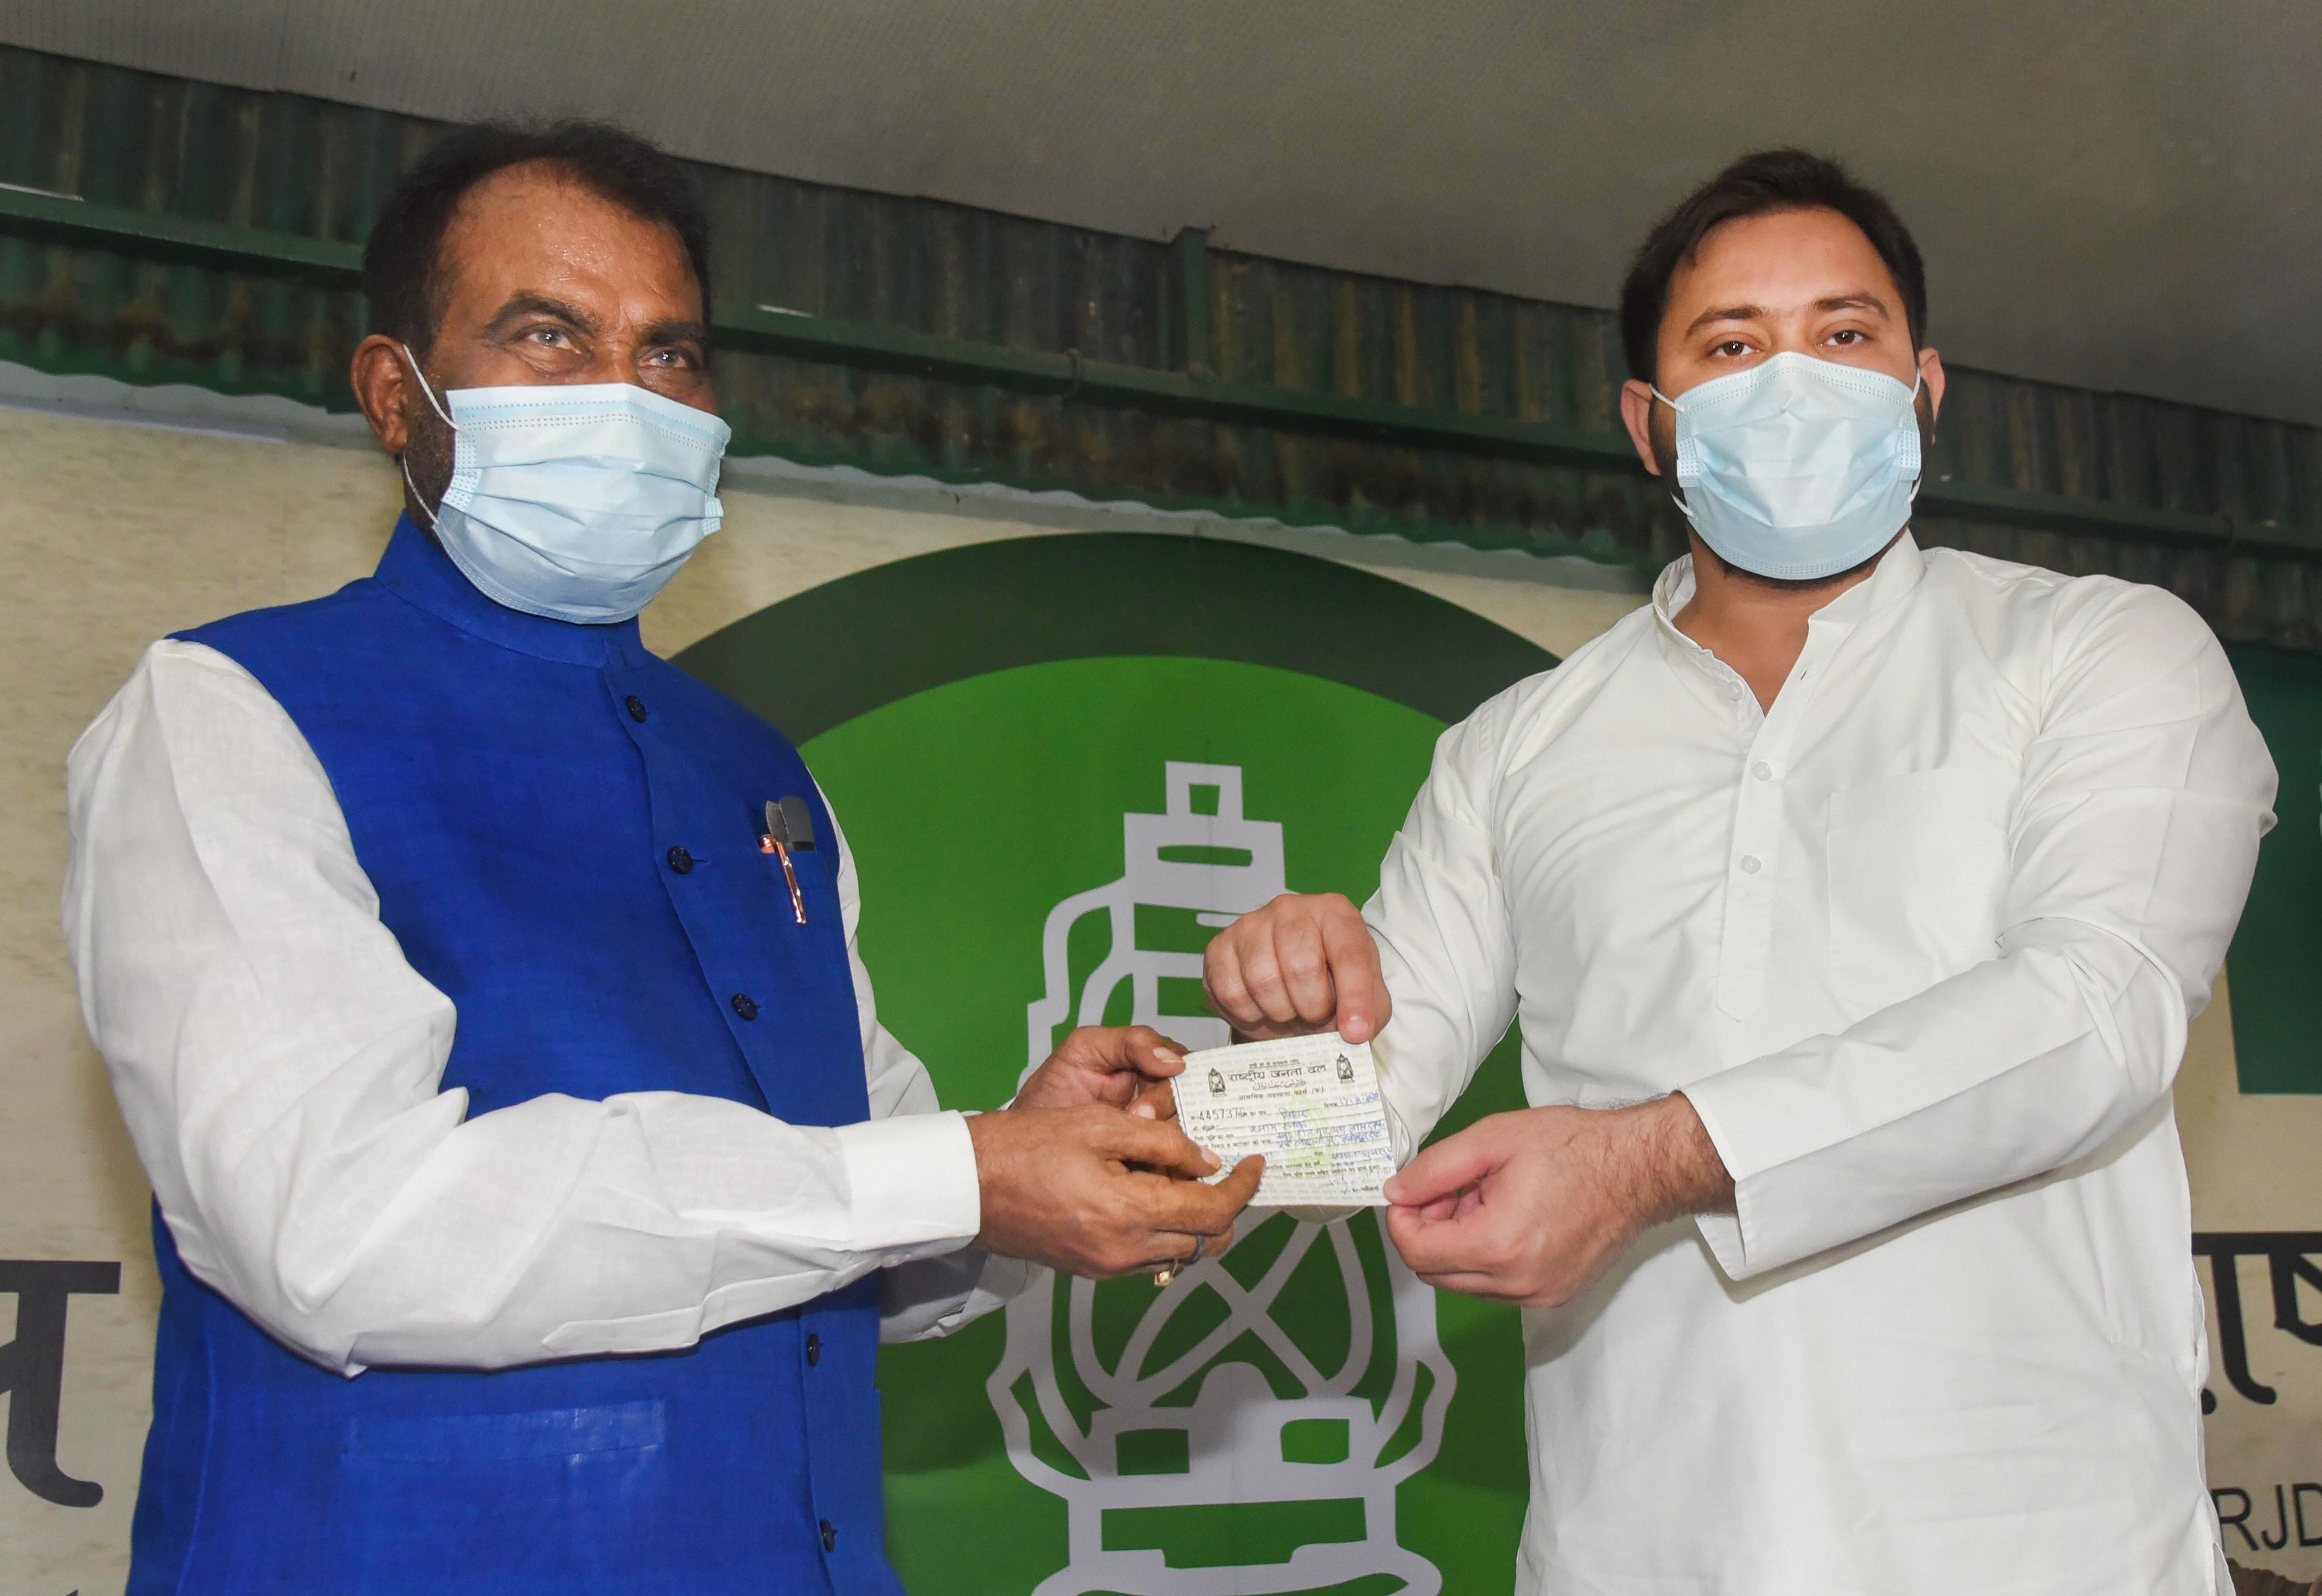 RJD leader Tejaswi Yadav presents the membership slip to former cabinet minister and former JD-U leader Shyam Rajak as he joins RJD party, in Patna, Monday, Aug. 17, 2020. Credit: PTI Photo